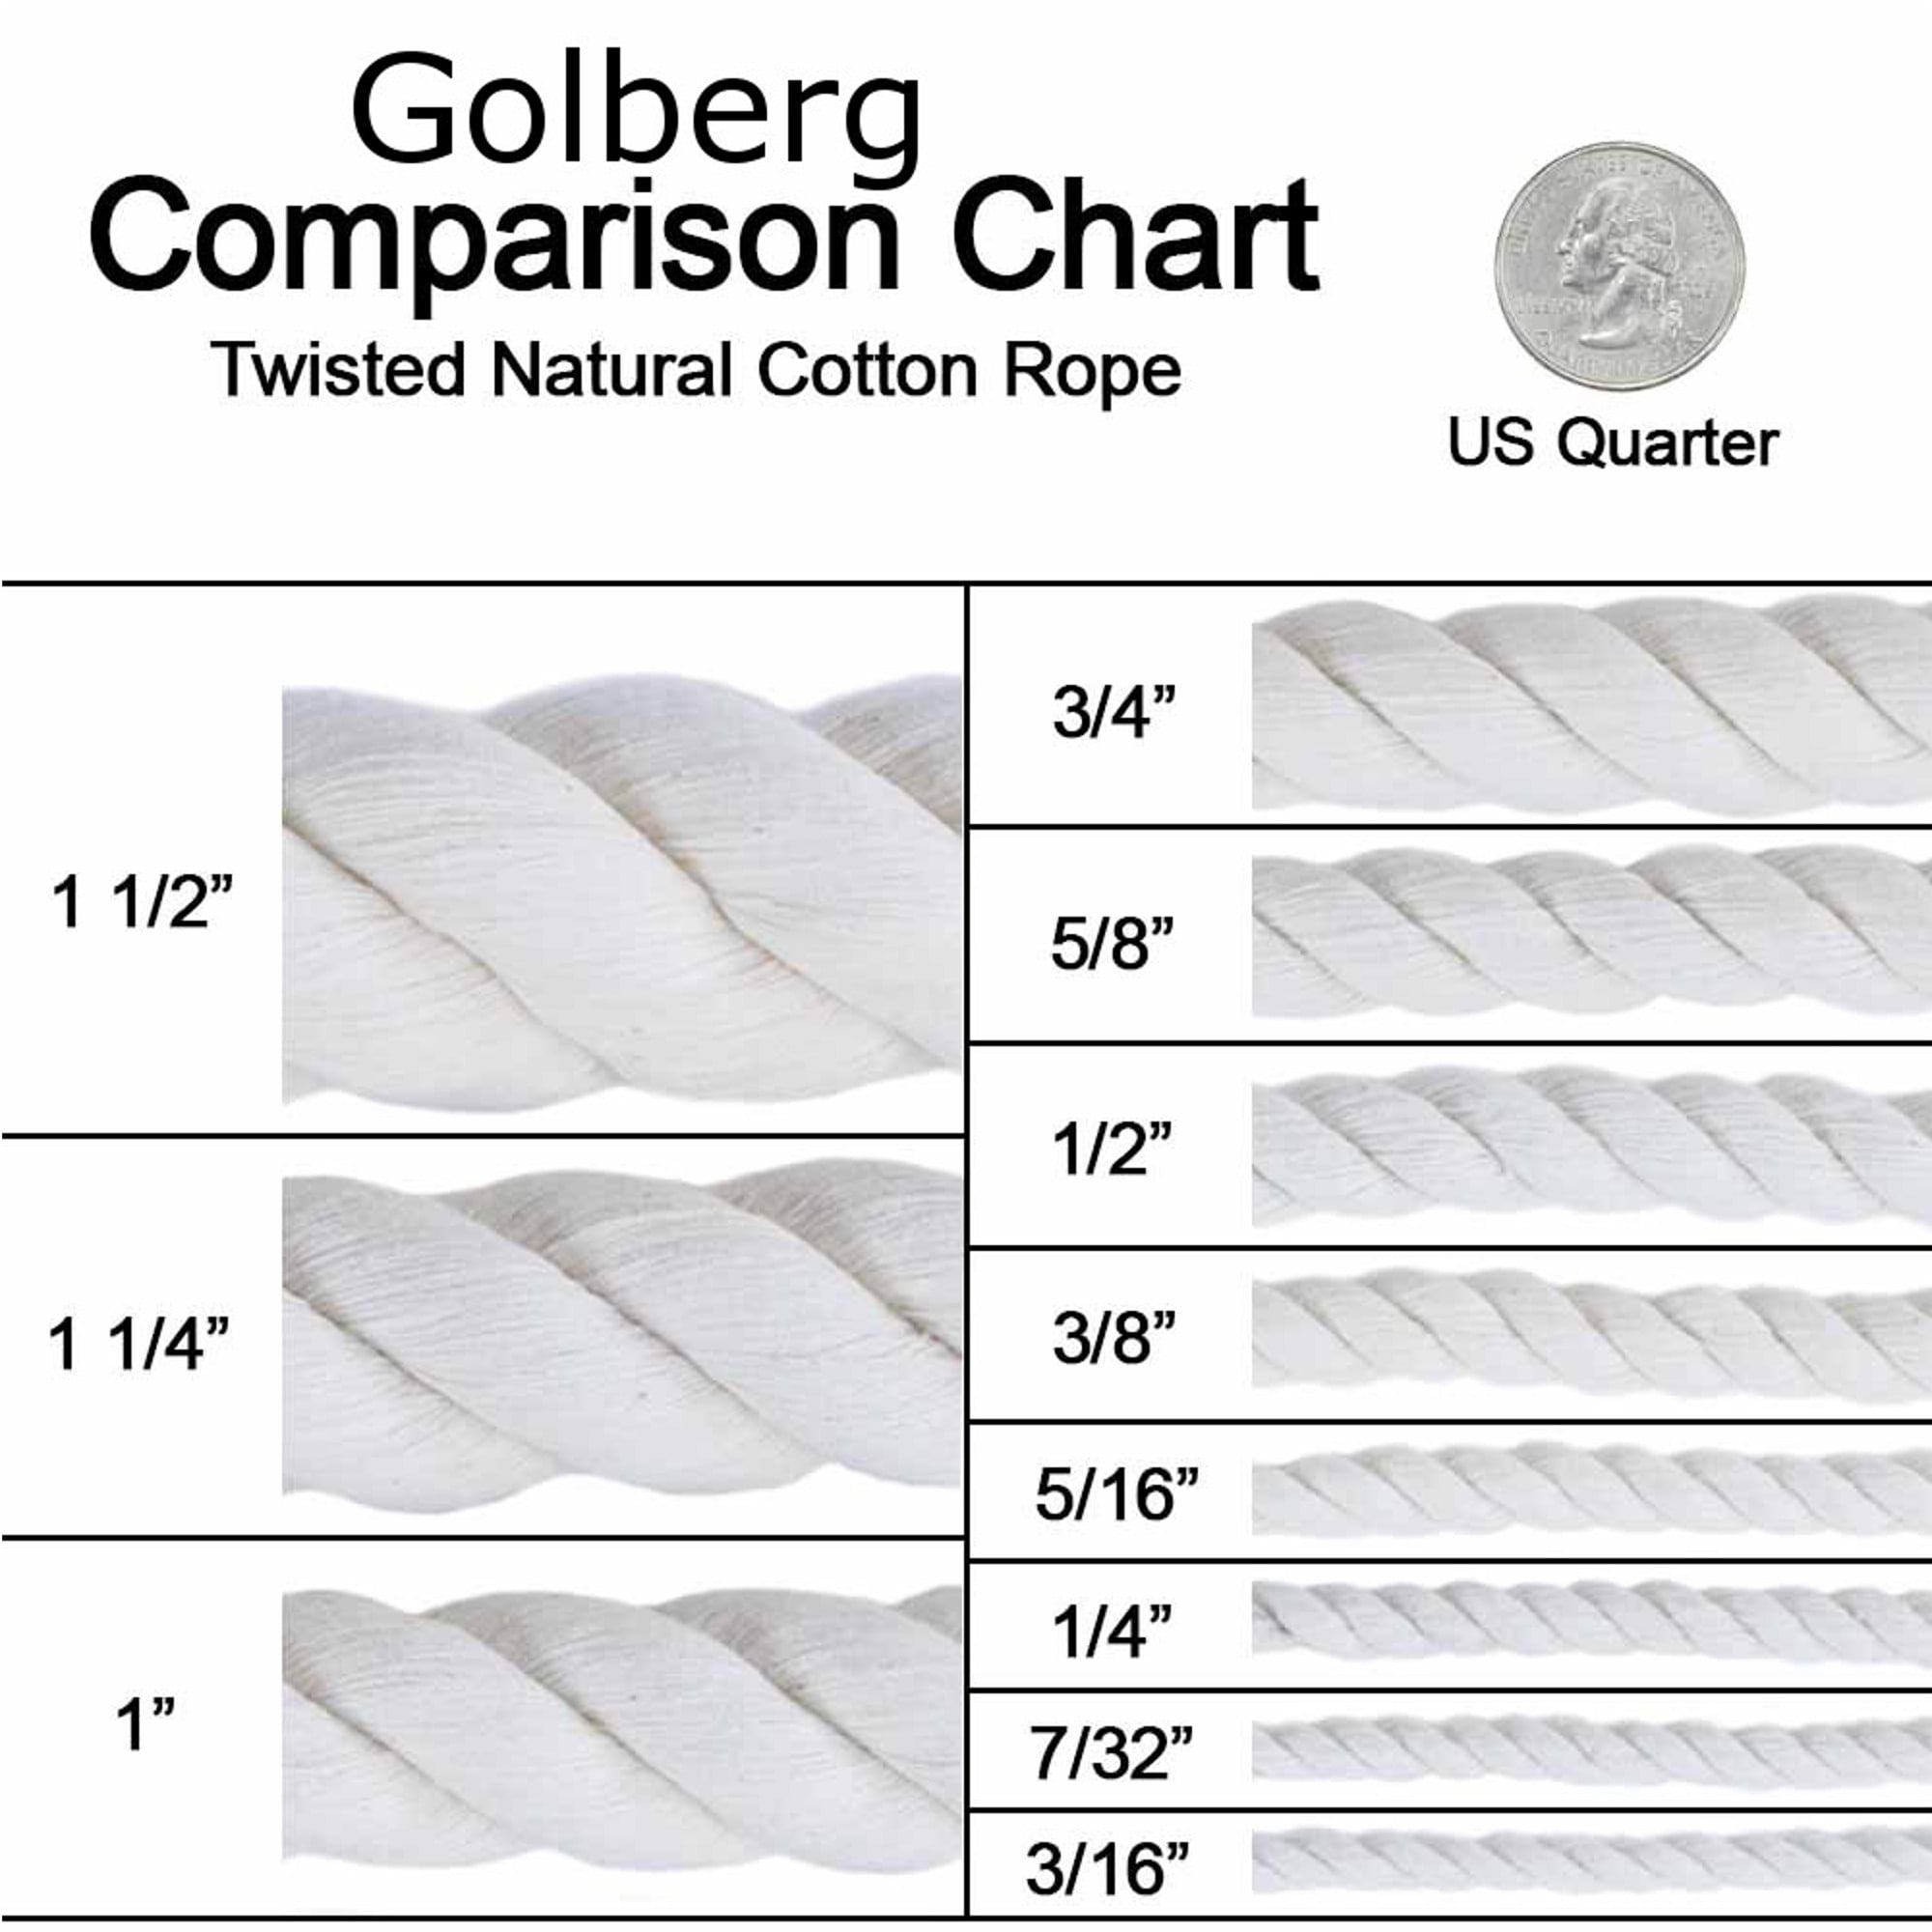 Golberg White Natural Cotton Rope - 1/2 Inch Diameter Twisted 100